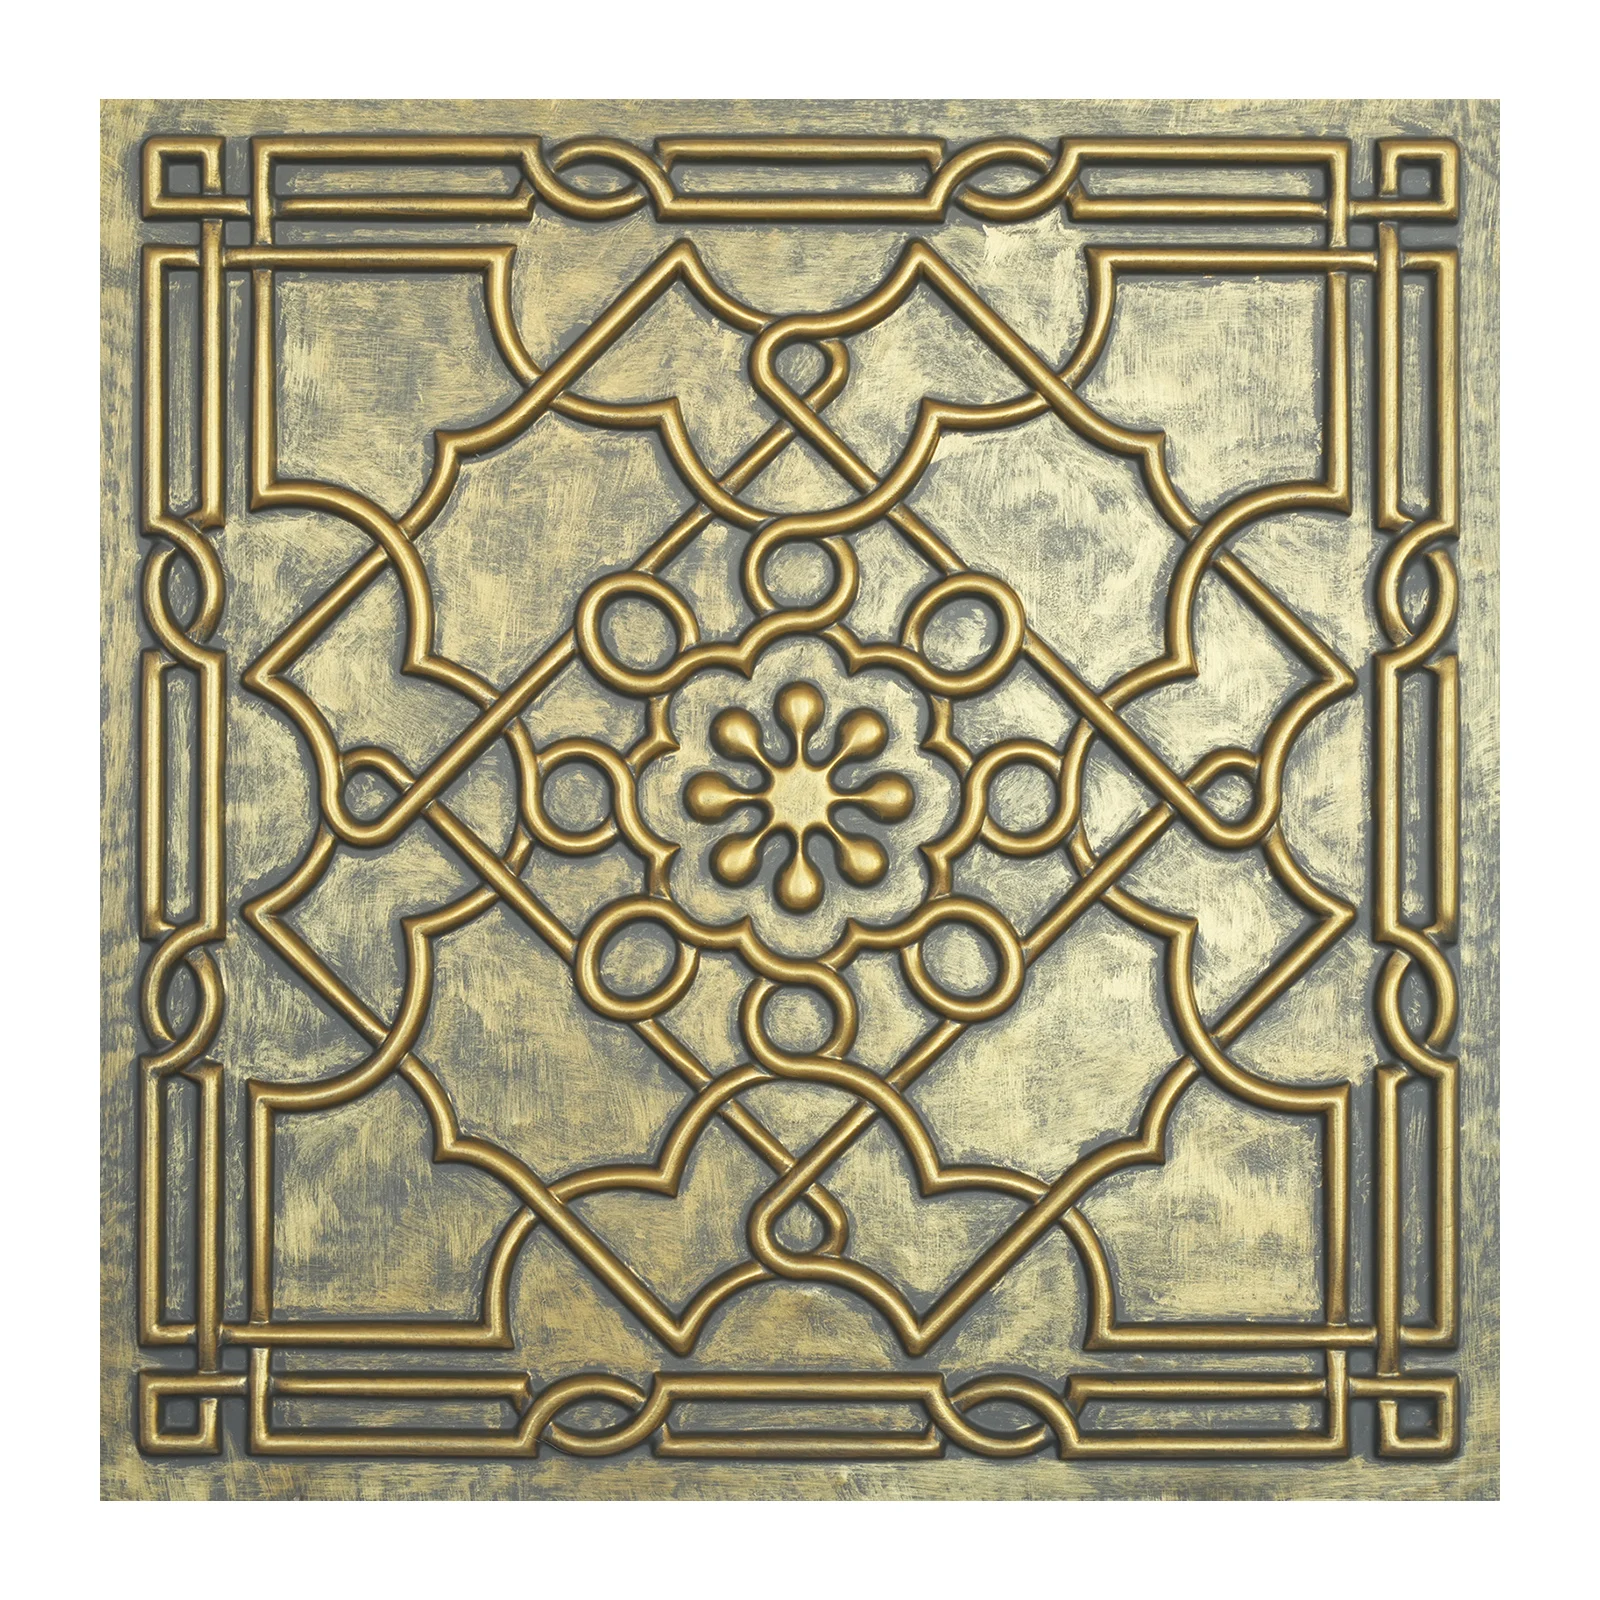 Vintage embossed tin ceiling tiles Decorative tin wall tile Easy to Install PVC Panels for Public house PL09 Ancient gold